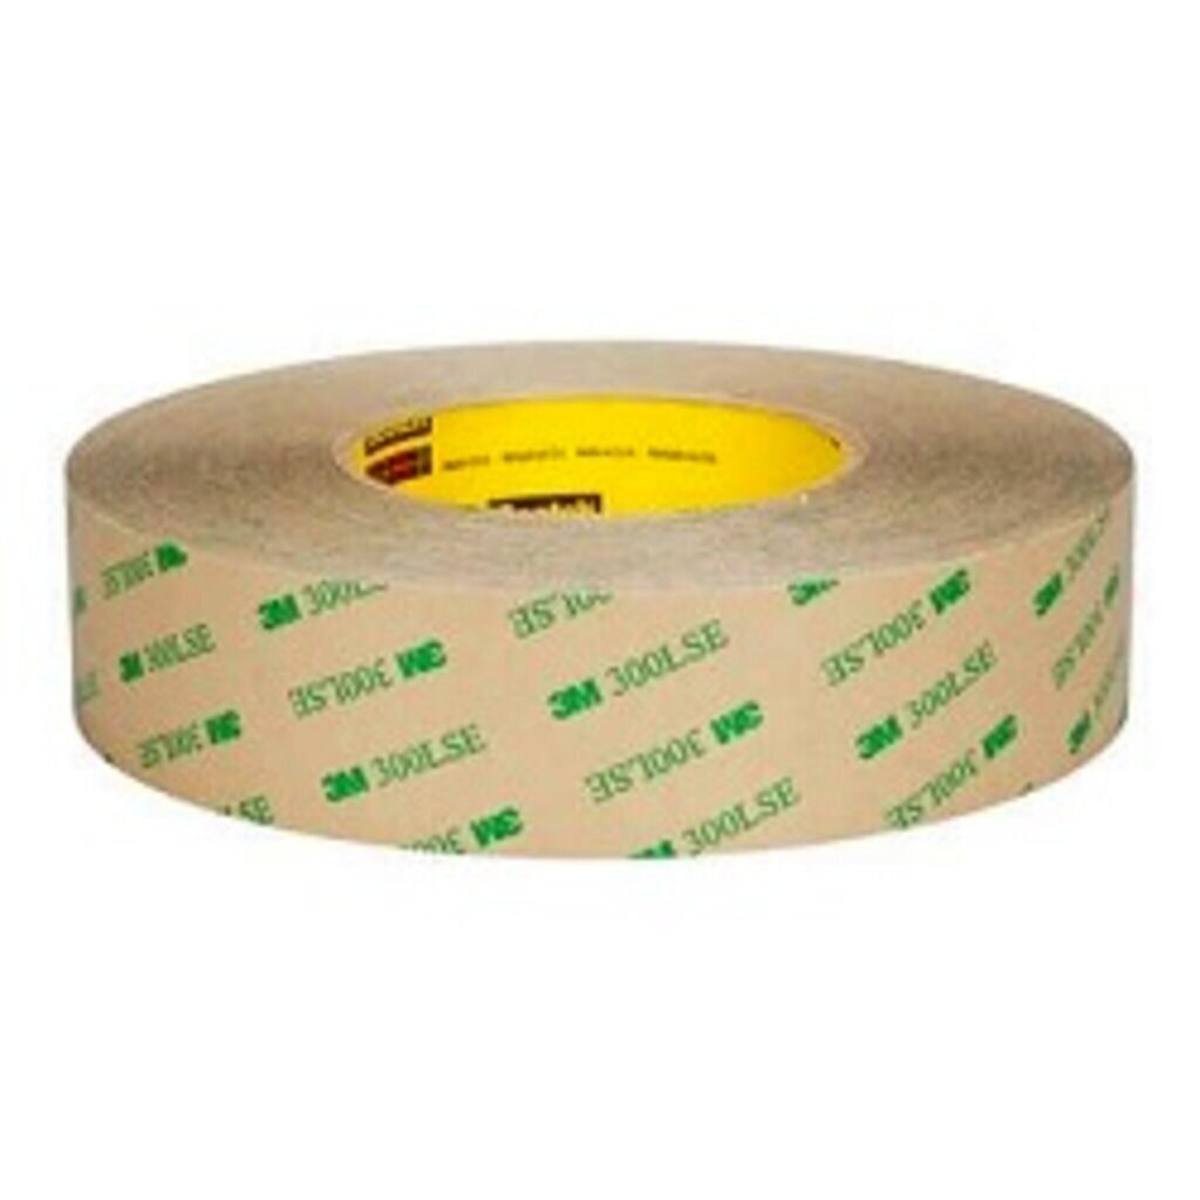 3M Dubbelzijdig plakband met polyester drager 9474LE, transparant, 610 mm x 0,914 m, 0,17 mm